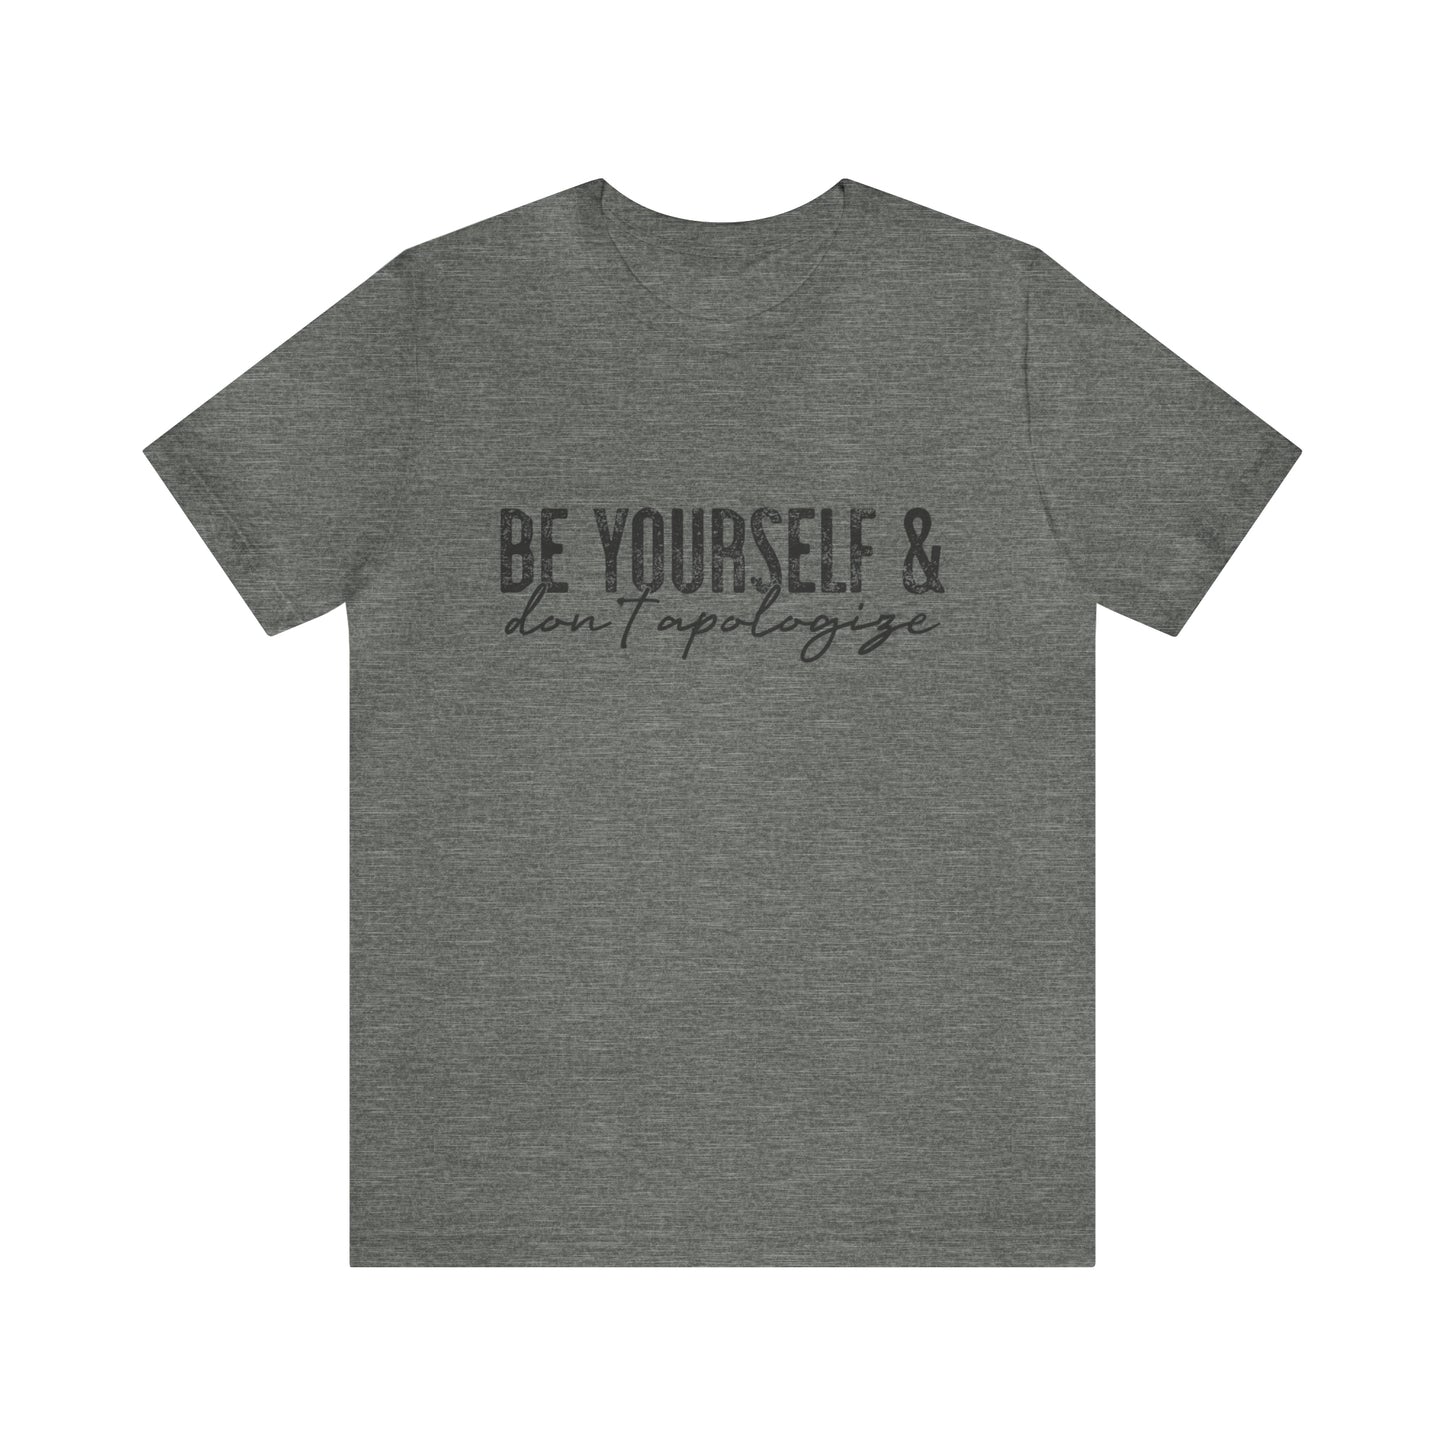 Be yourself and don't apologize  Short Sleeve Women's Tee